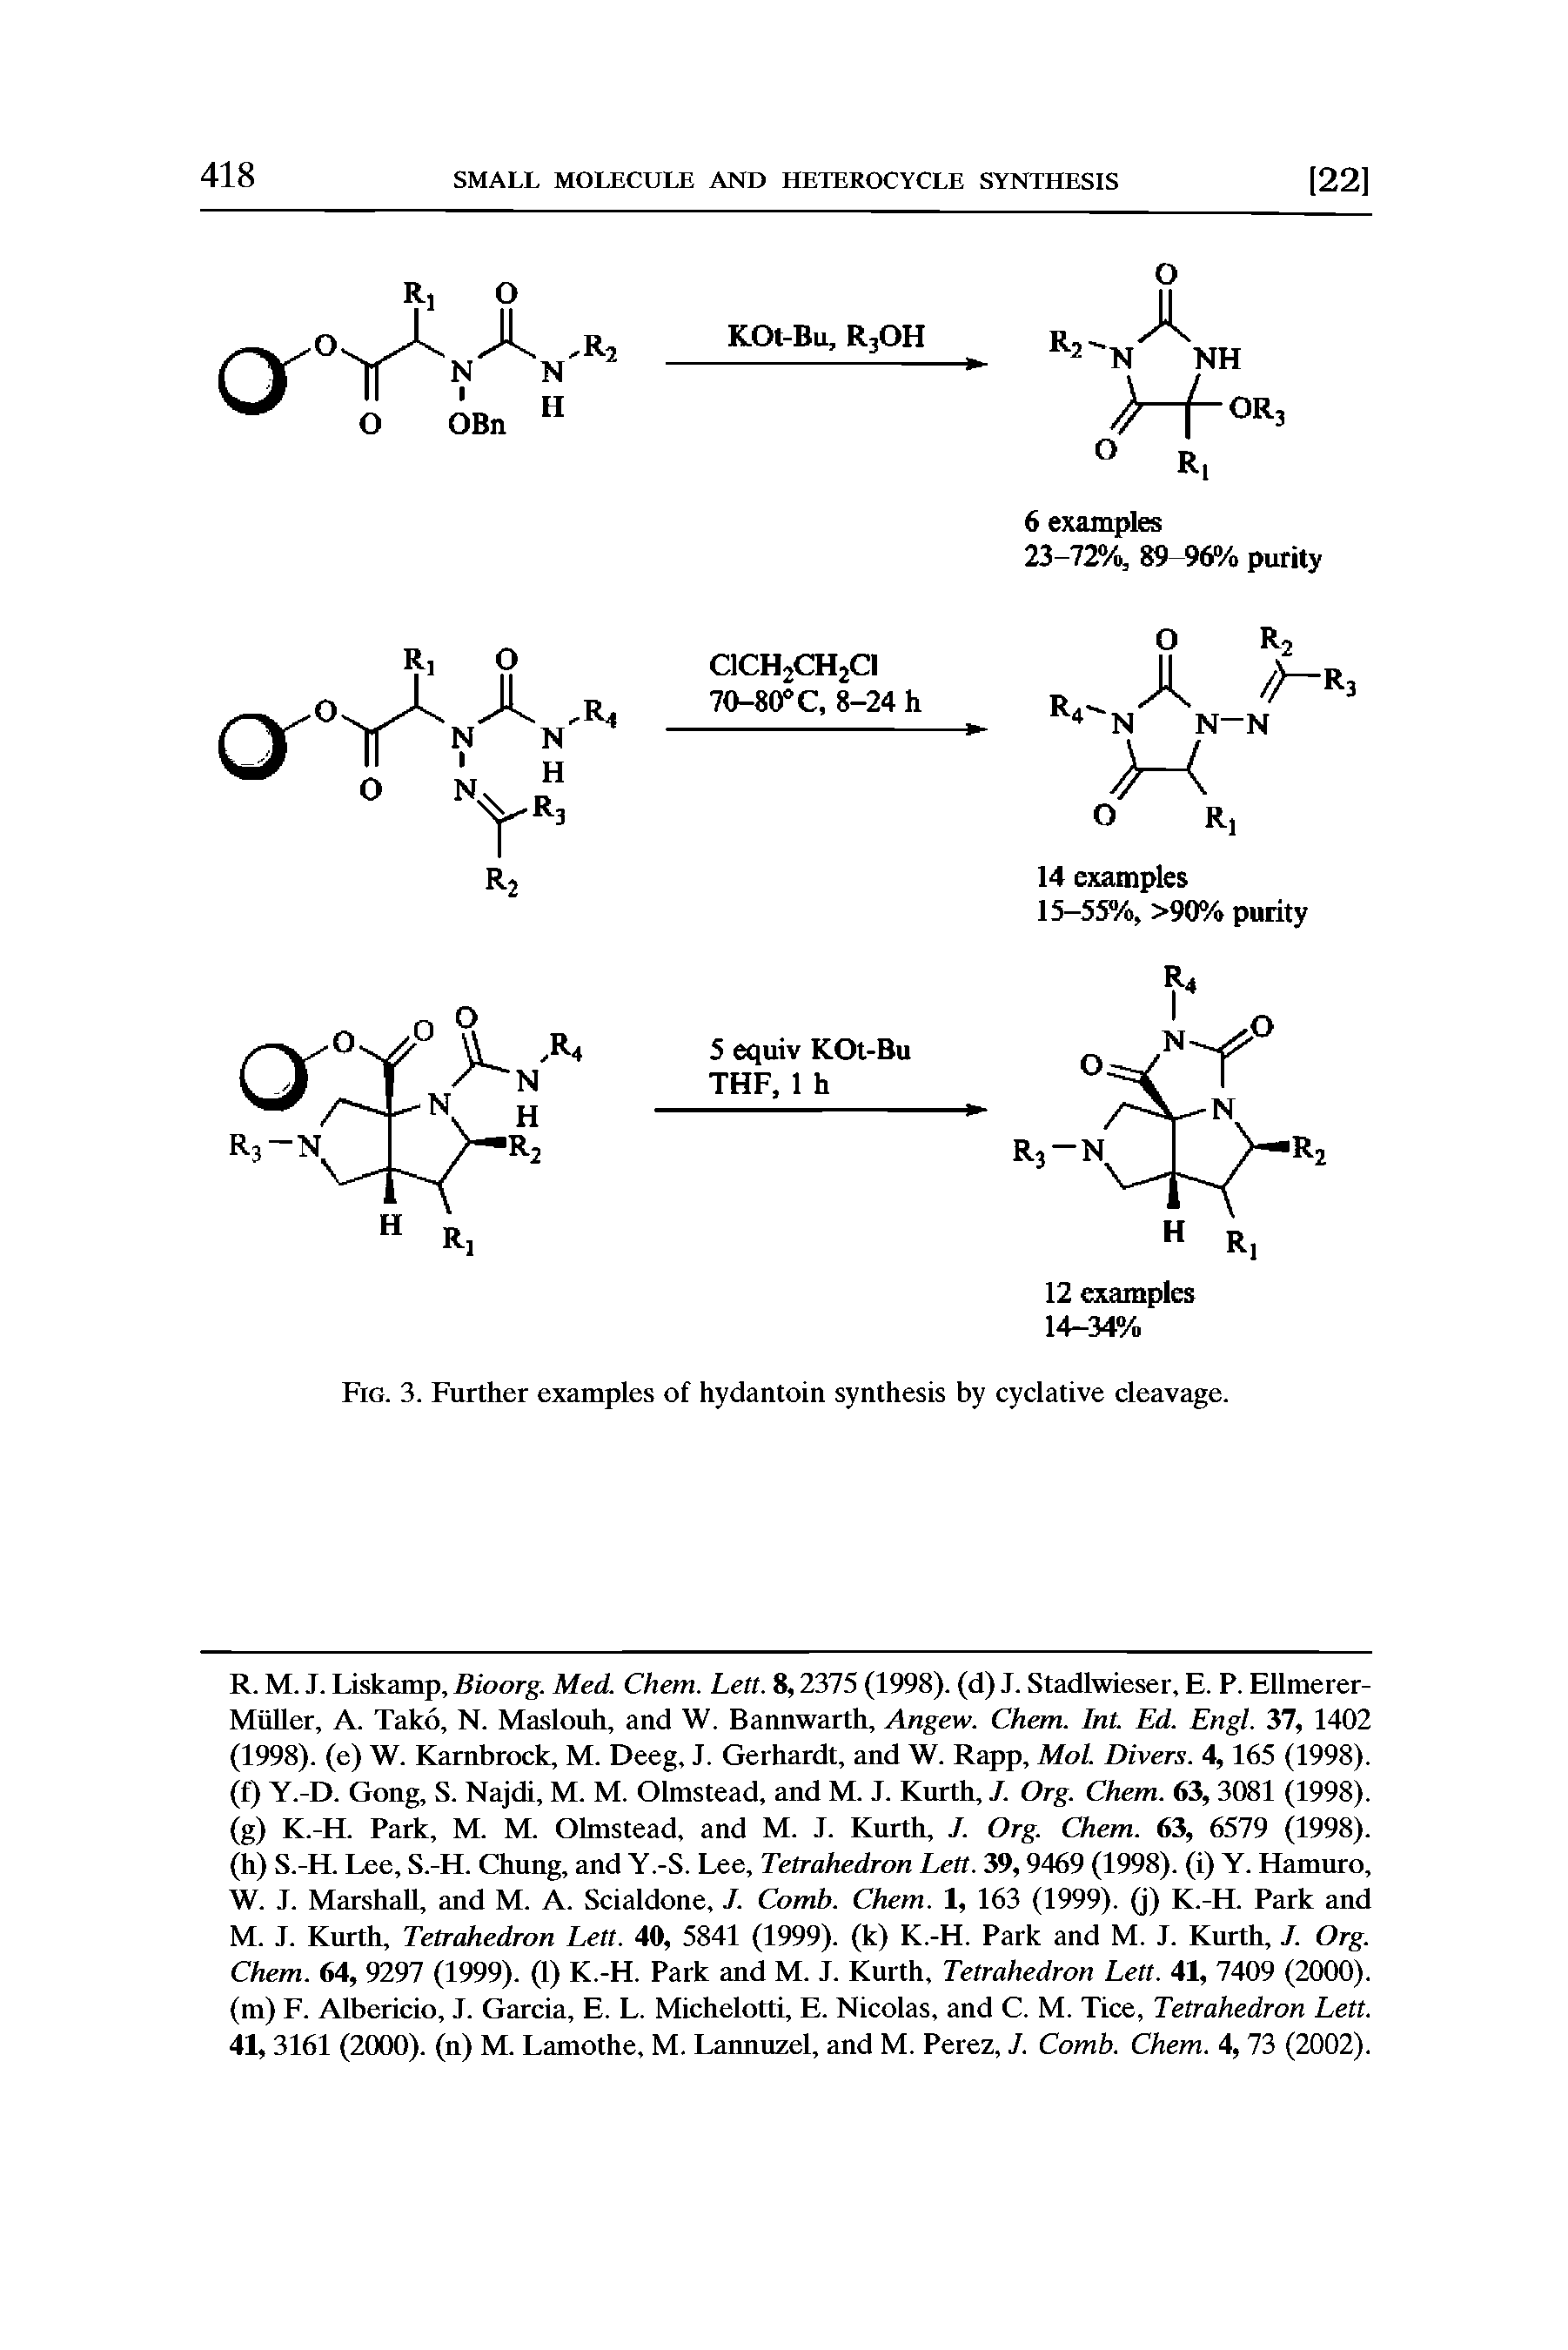 Fig. 3. Further examples of hydantoin synthesis by cyclative cleavage.